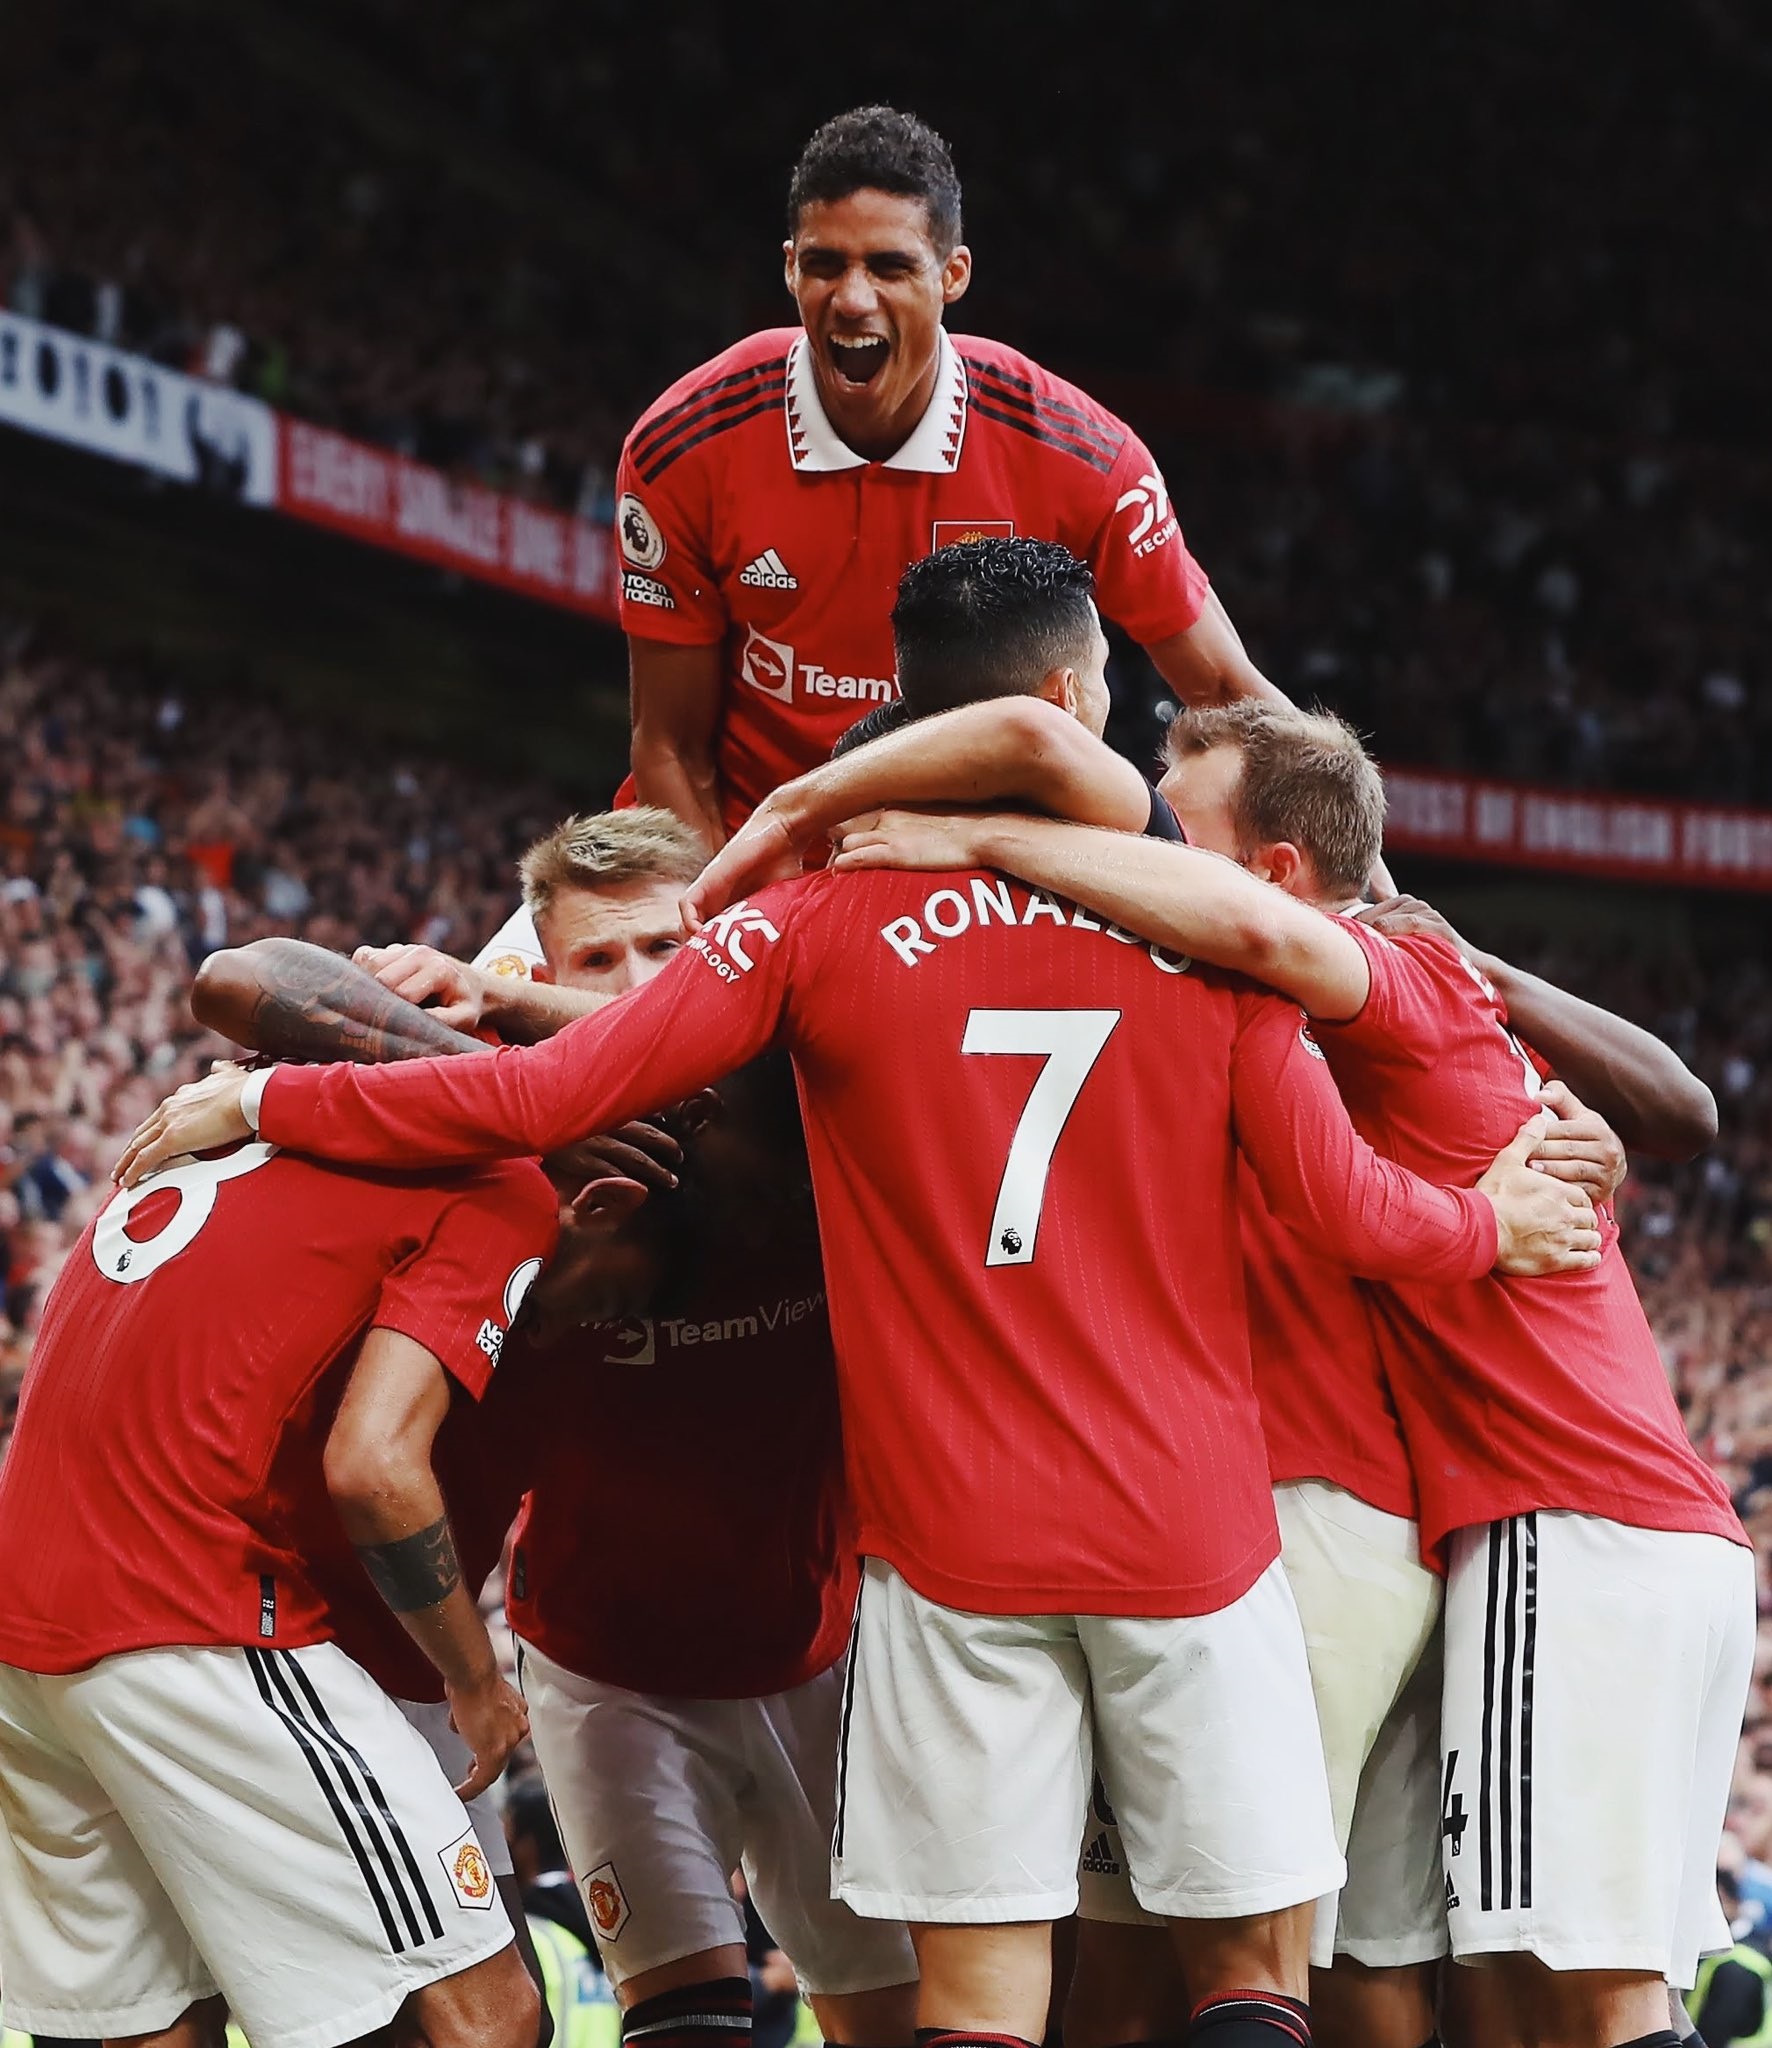 Manchester United 